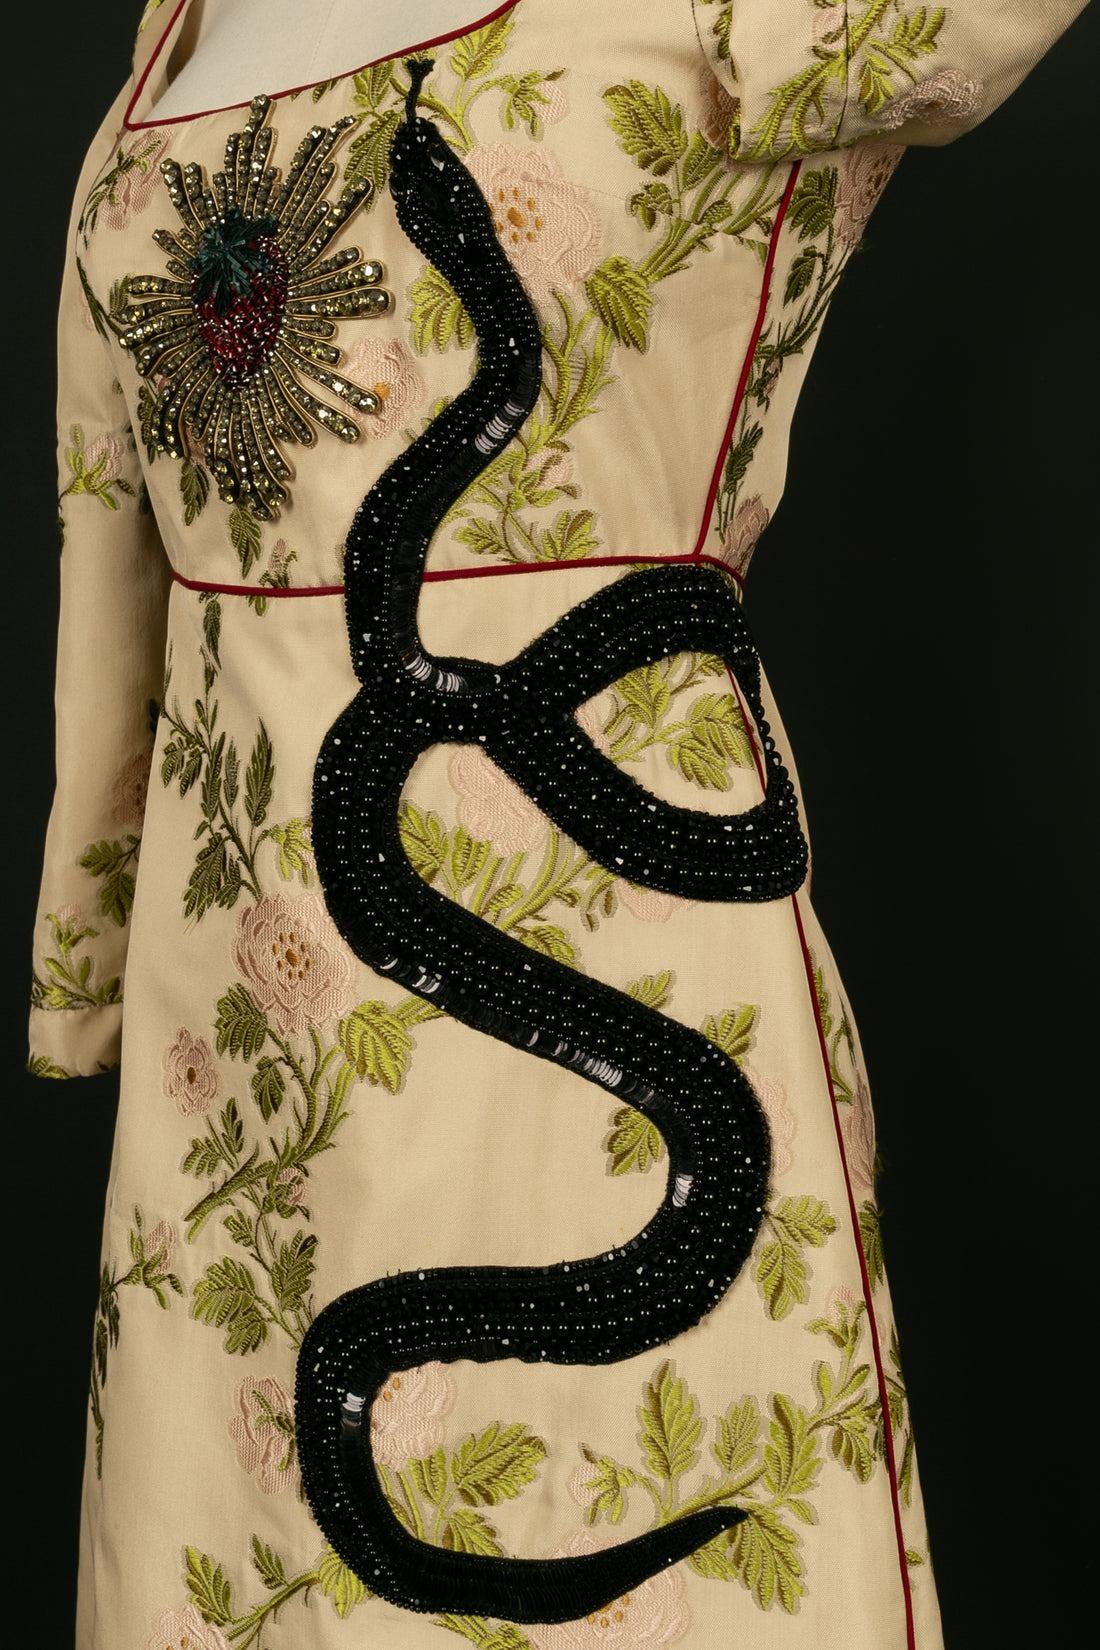 Women's Gucci Mid-Length Dress Pre-Fall with Floral Patterns, 2016